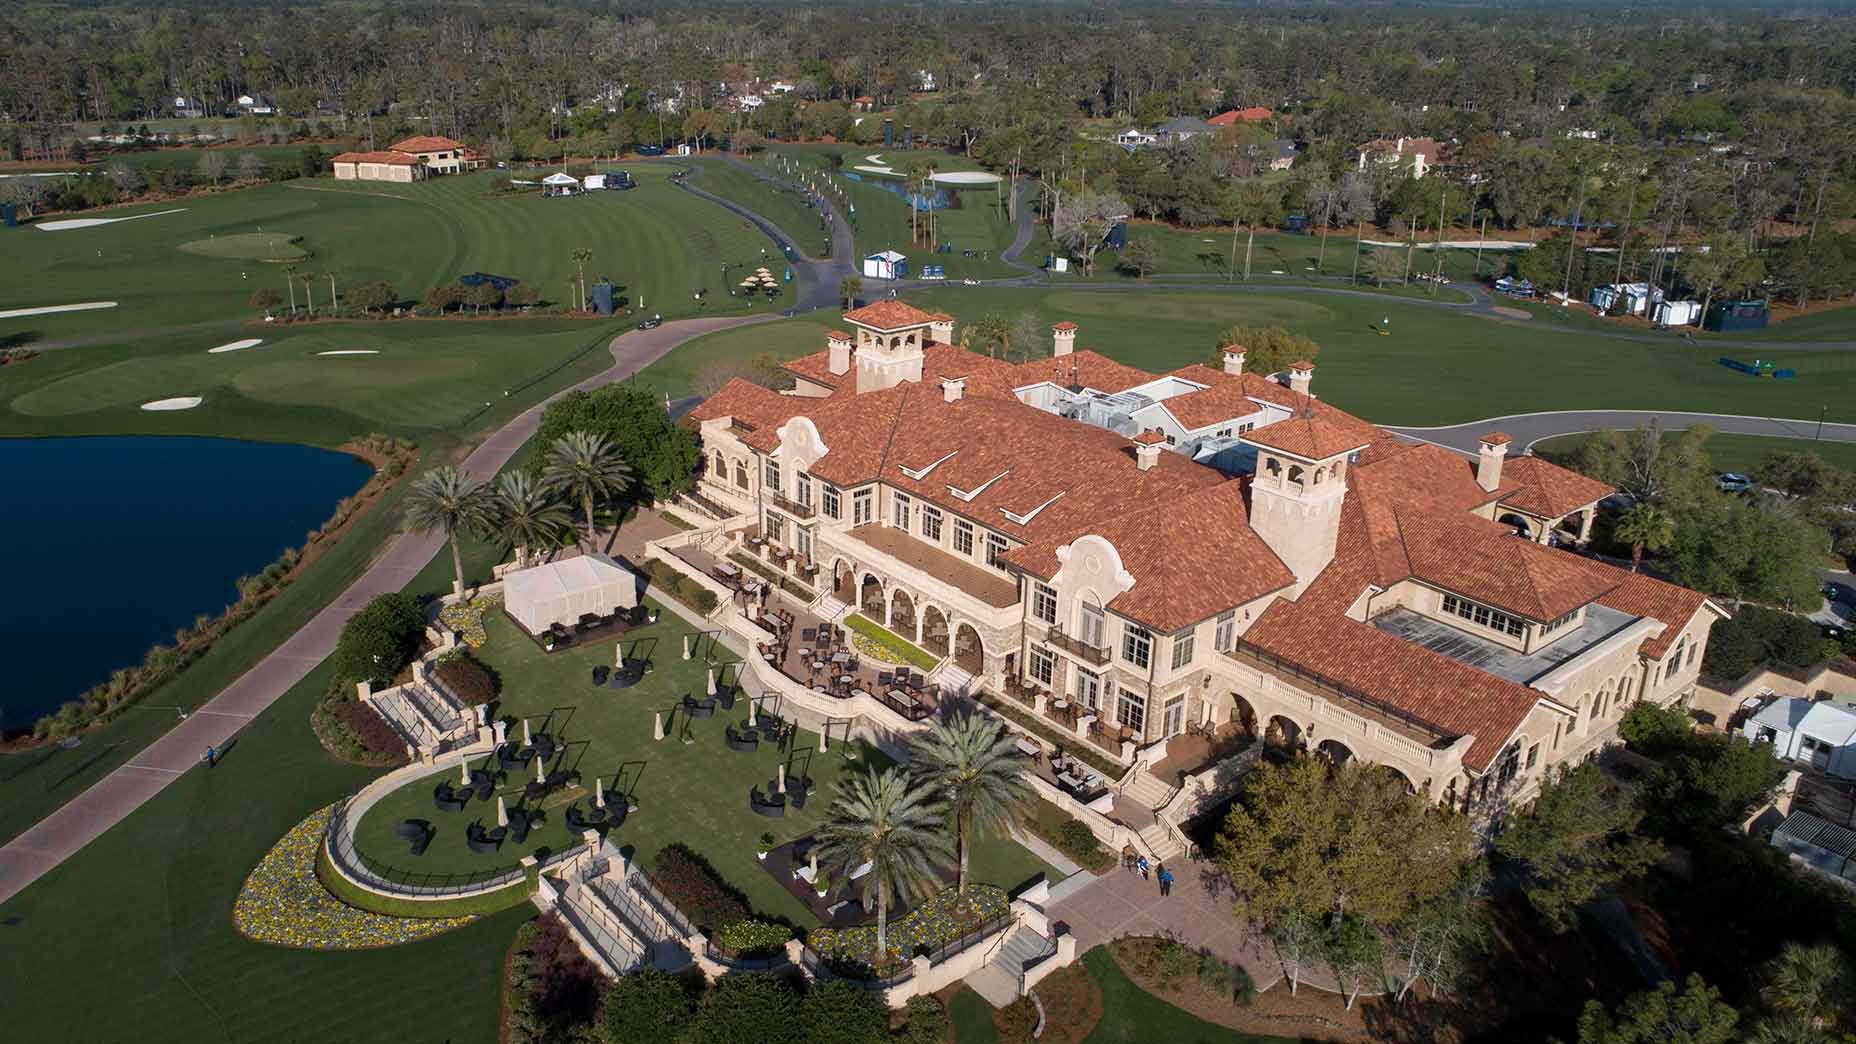 There's an even more expensive, redcarpet way to play TPC Sawgrass